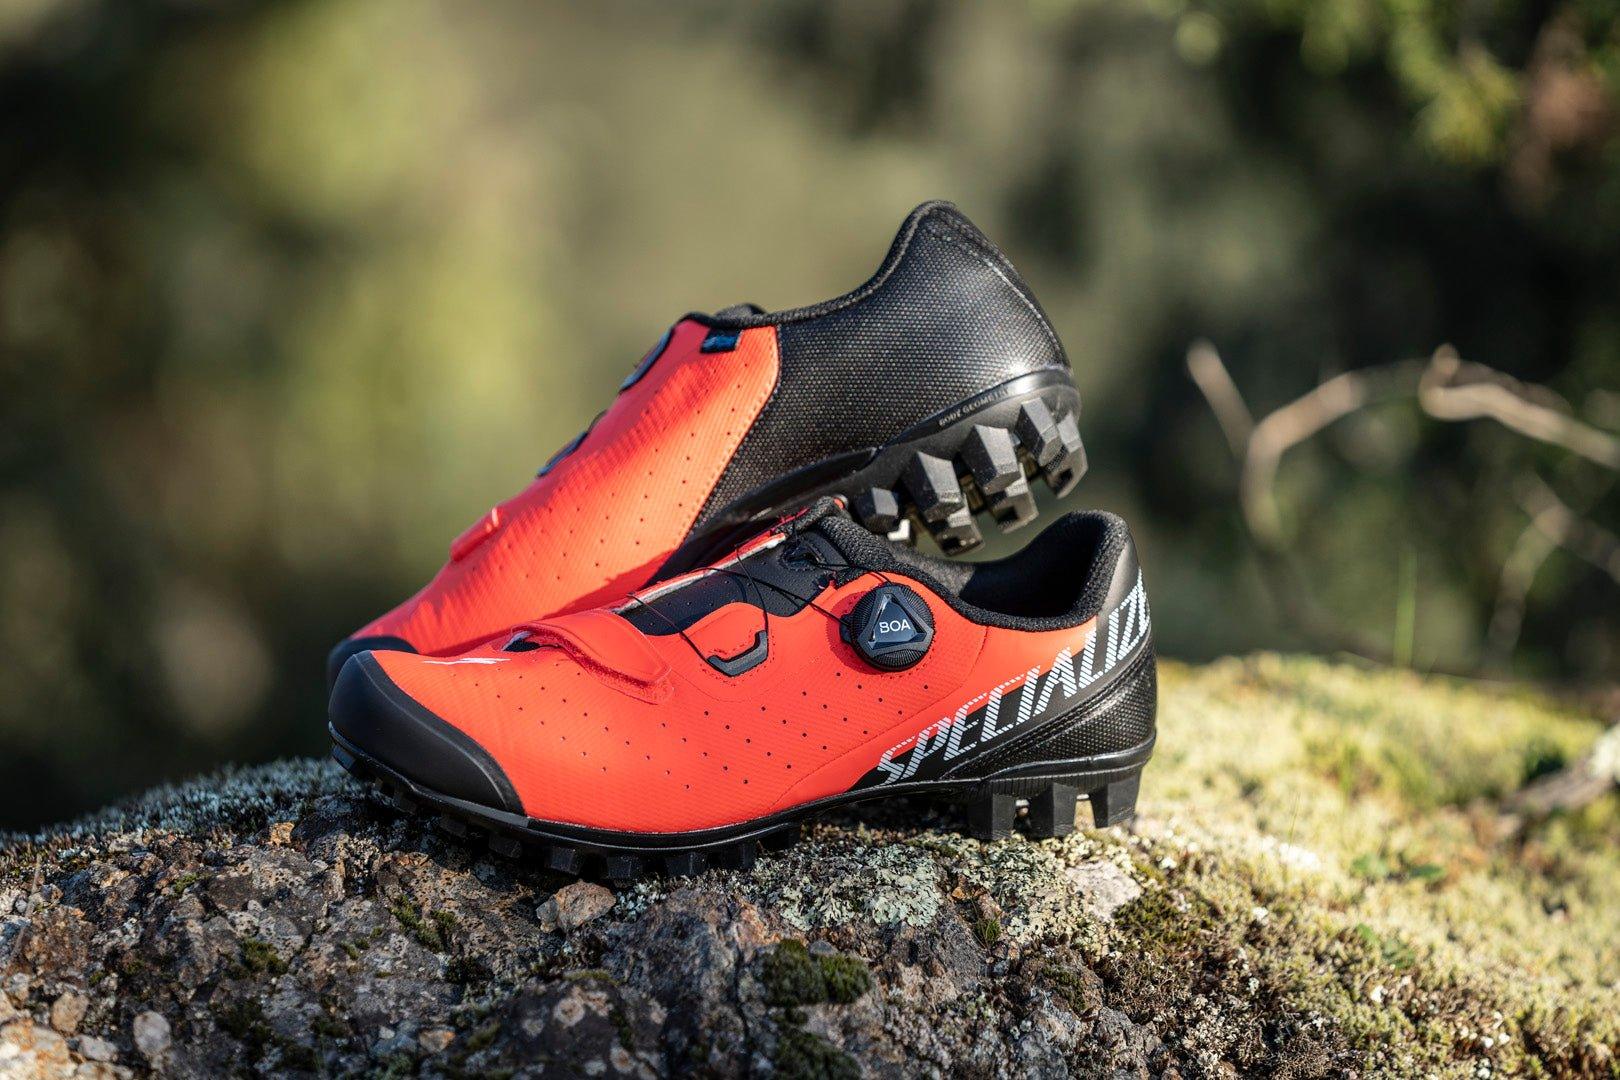 Mountain Shoes – Strictly Bicycles